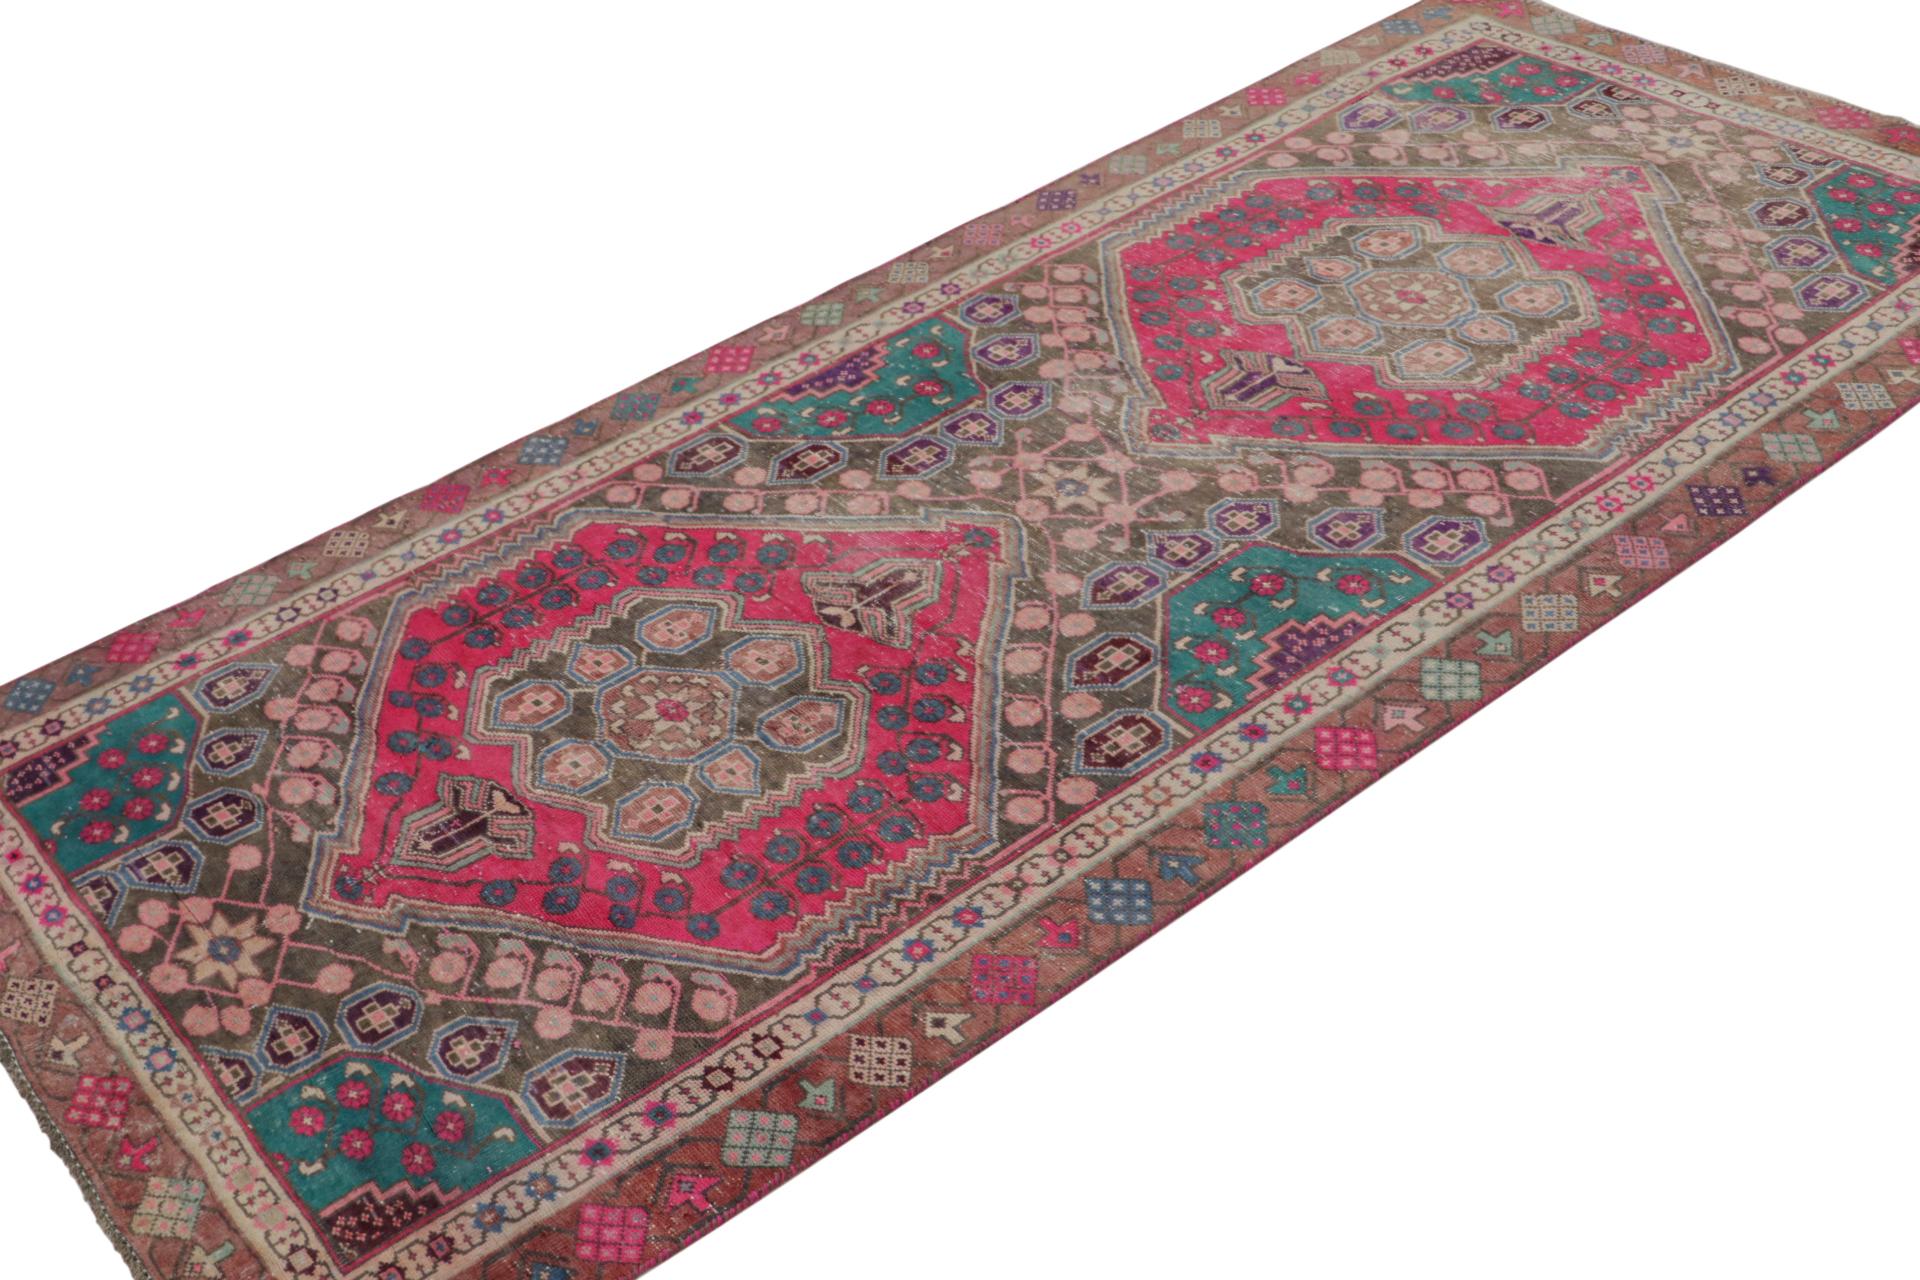 Hand knotted in wool on cotton, a 4x8 Persian Shiraz rug circa 1970-1980 - latest to join Rug & Kilim’s vintage selections.

On the Design:

This rug is an interesting piece of bright, beautifully saturated jewel tones, namely pink and teal in the